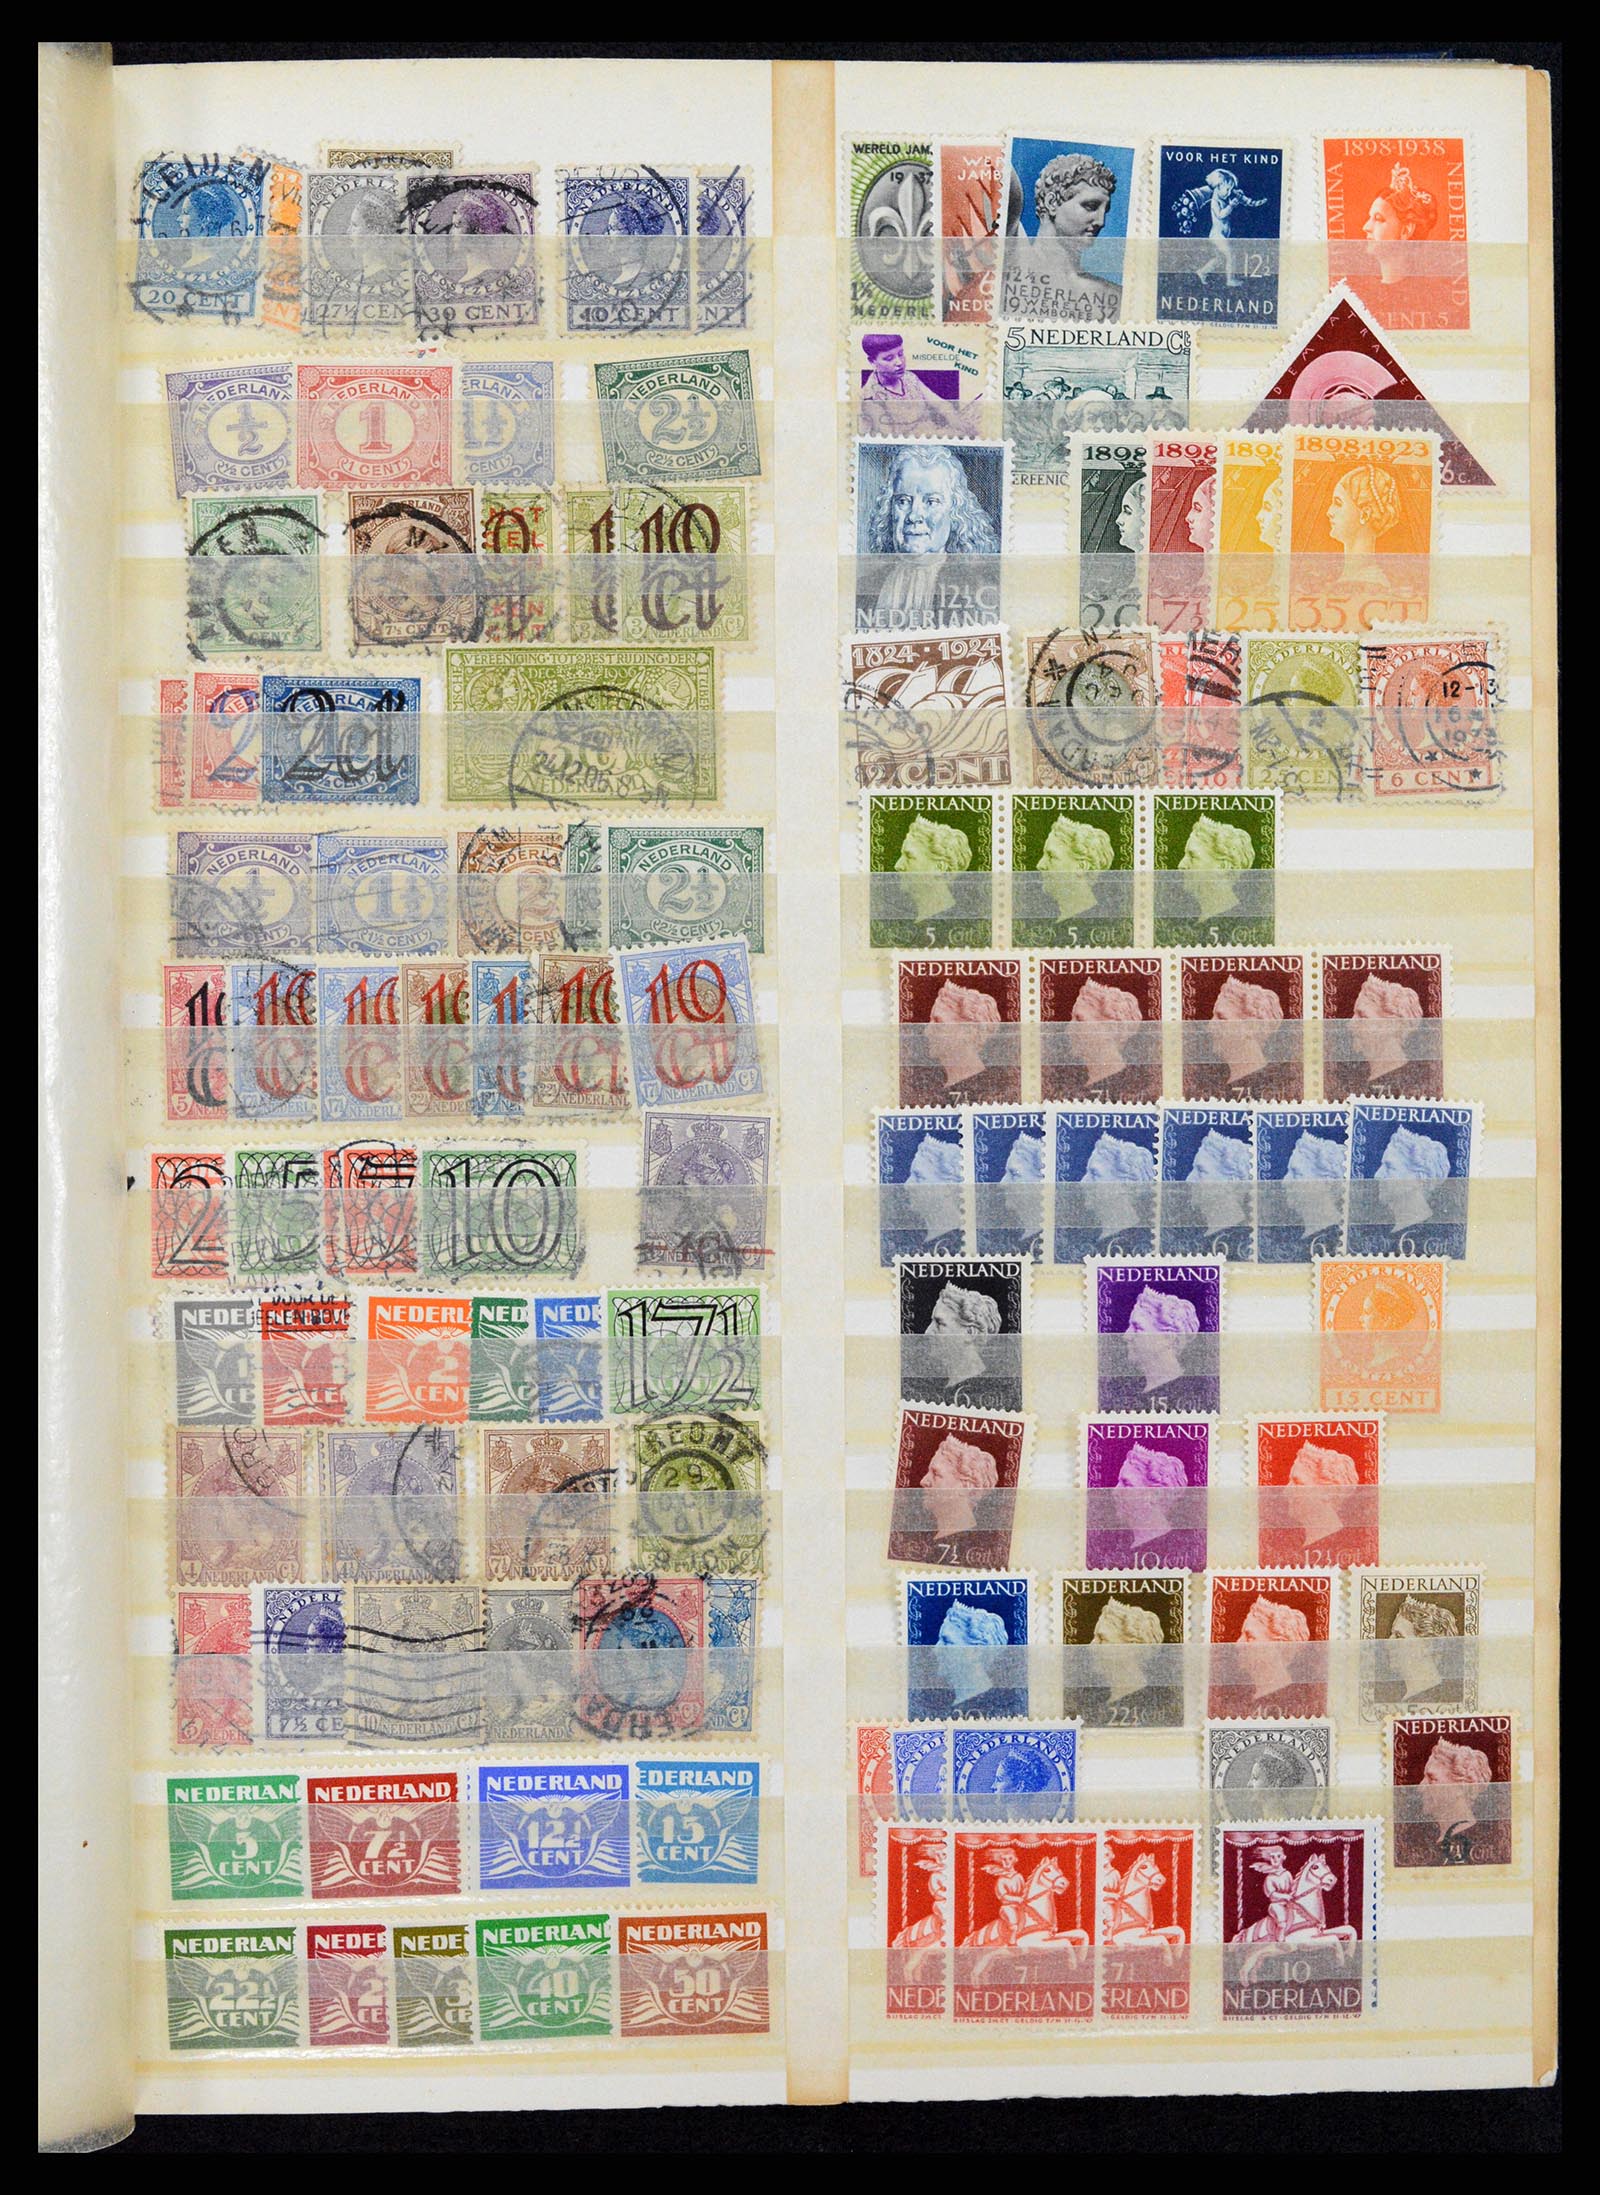 37714 001 - Stamp collection 37714 Netherlands 1920-1979.